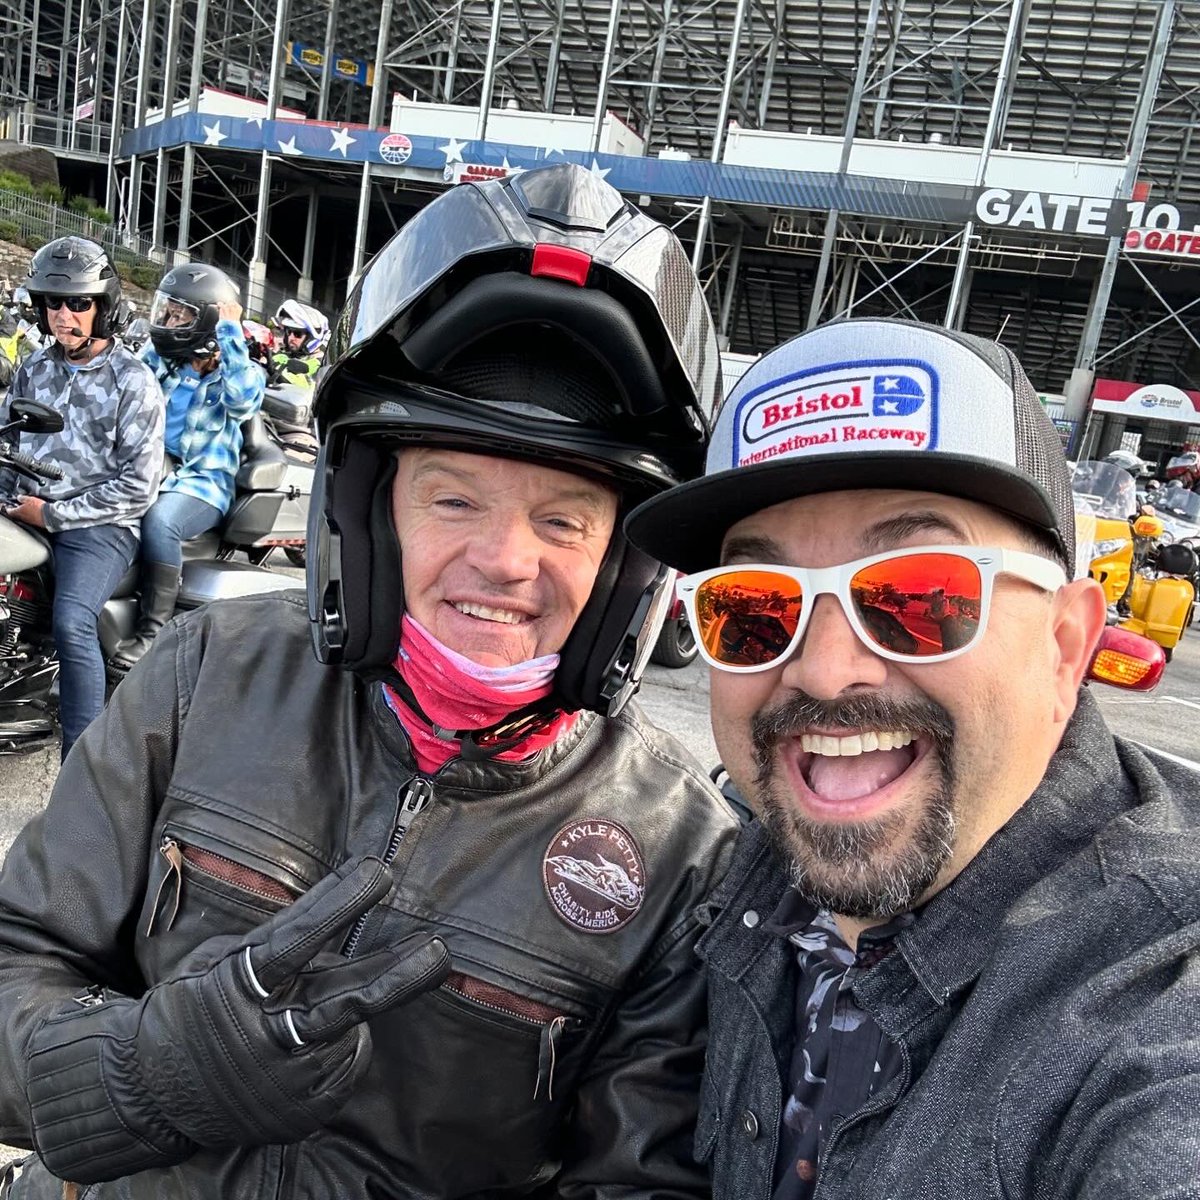 🌶️🚨Spicy Reminder! 

#TracksideLive is back next week @NWBSpeedway w @Kenny_Wallace @TheJohnnyTV @WendyVenturini Noon Sunday - Great to catch up w my friend Kenny on the @KPCharityRide stop here @ItsBristolBaby